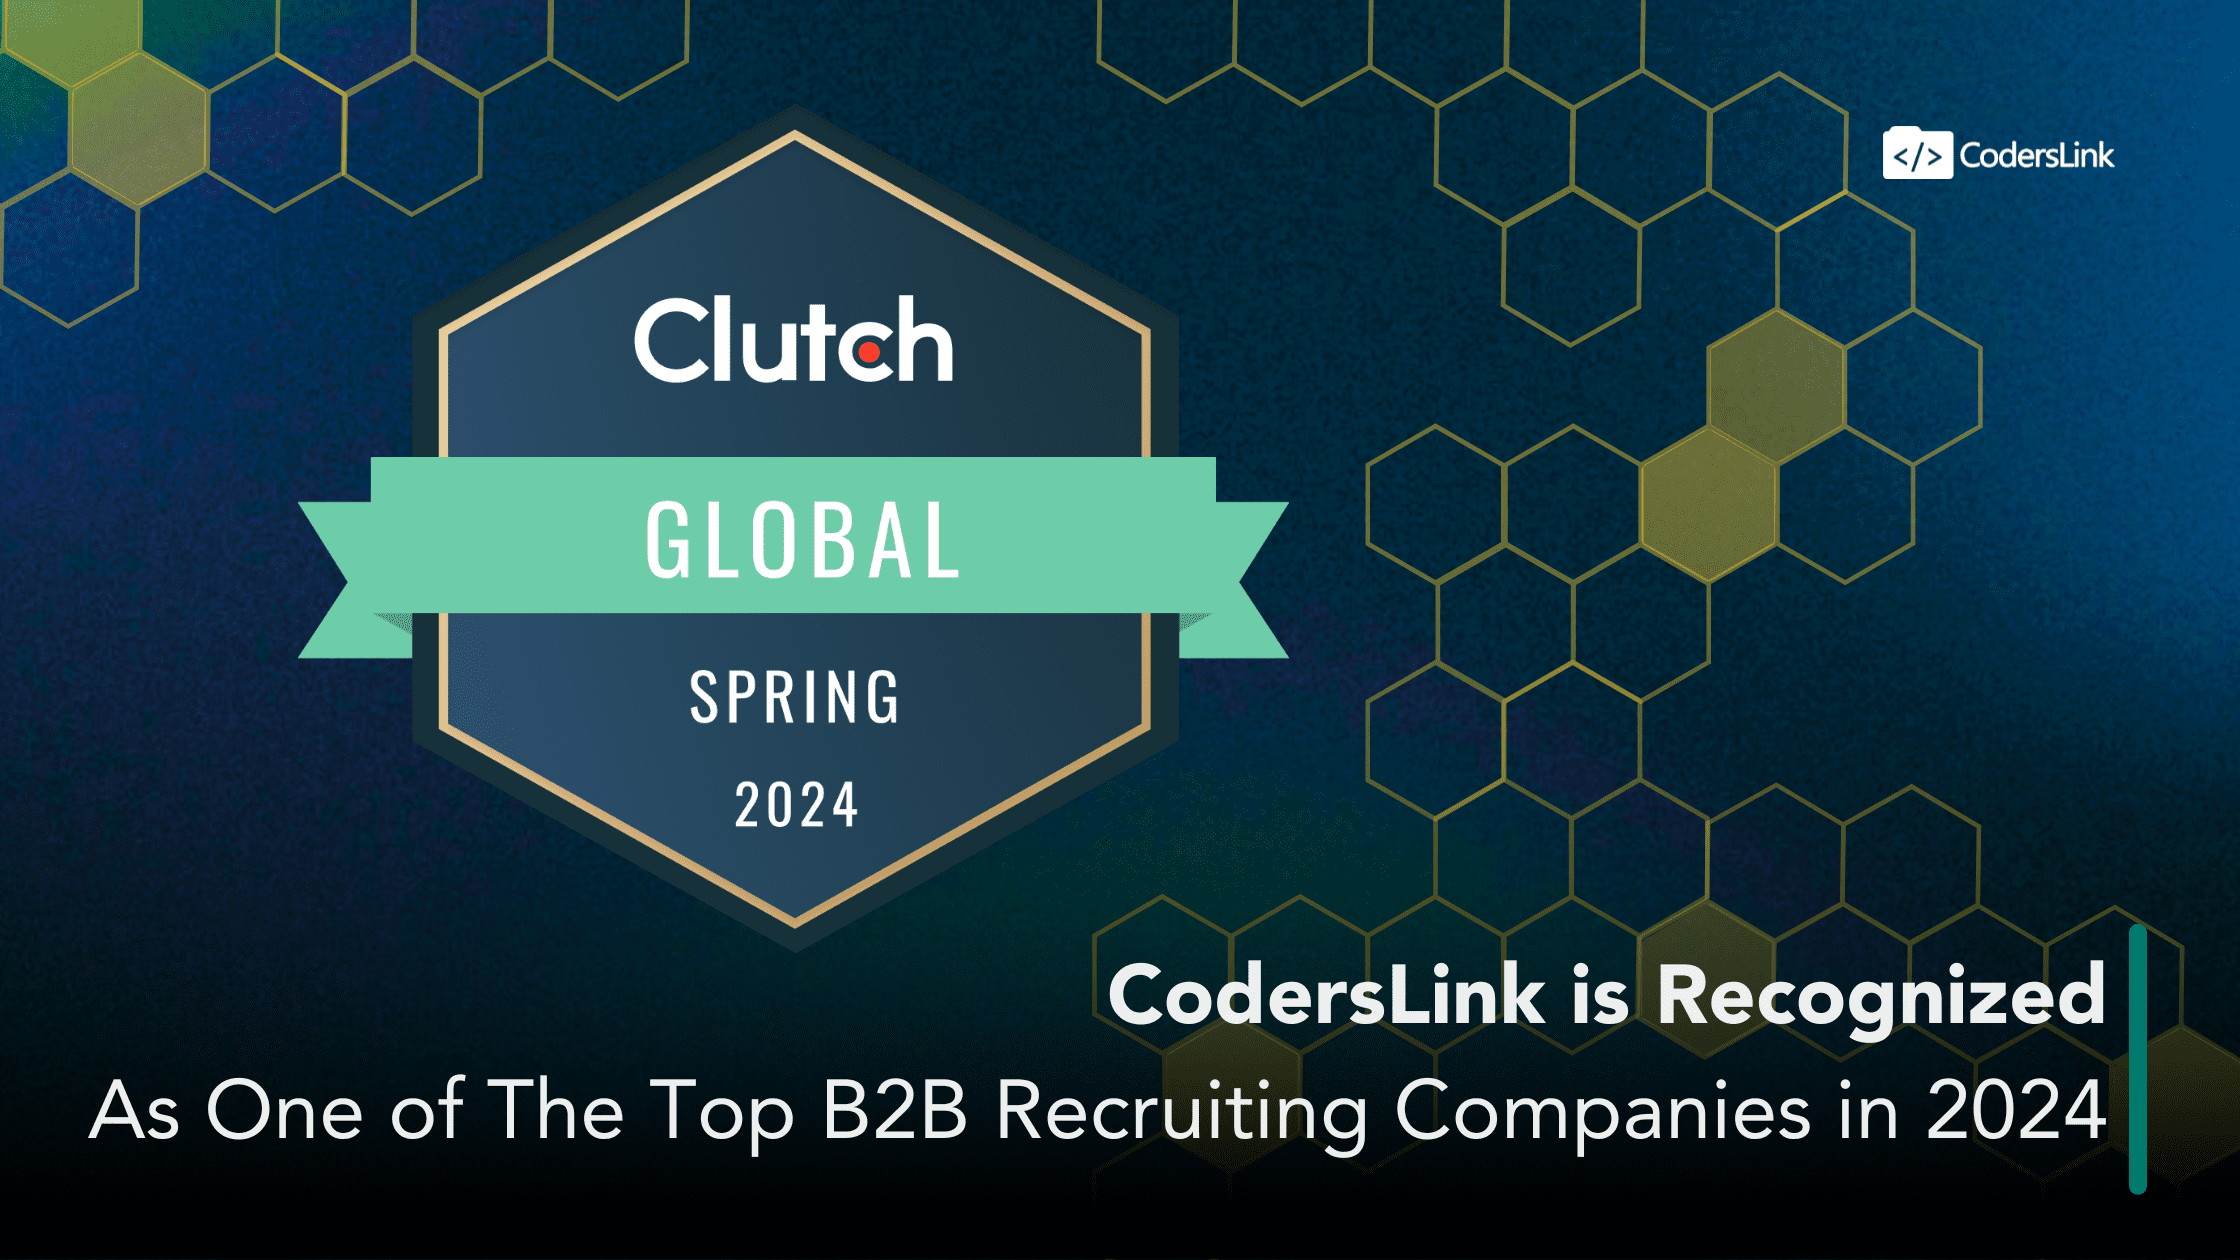 Clutch Global Leader Spring 2024 Badge - CodersLink Recognized as One of the Top B2B Recruiting Companies in 2024